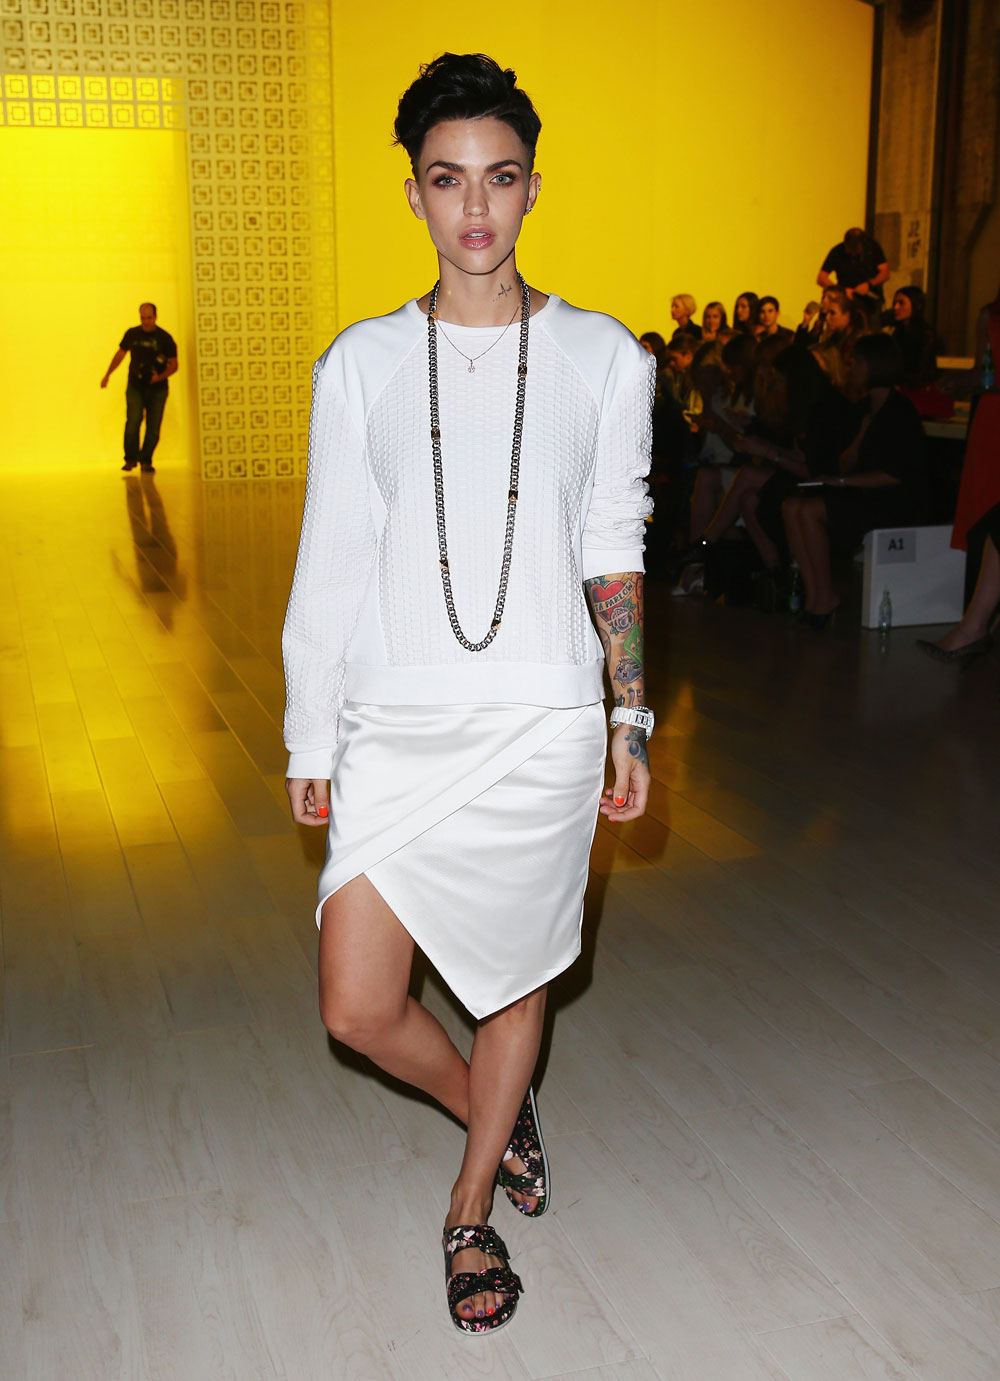 Ruby Rose at Suboo show